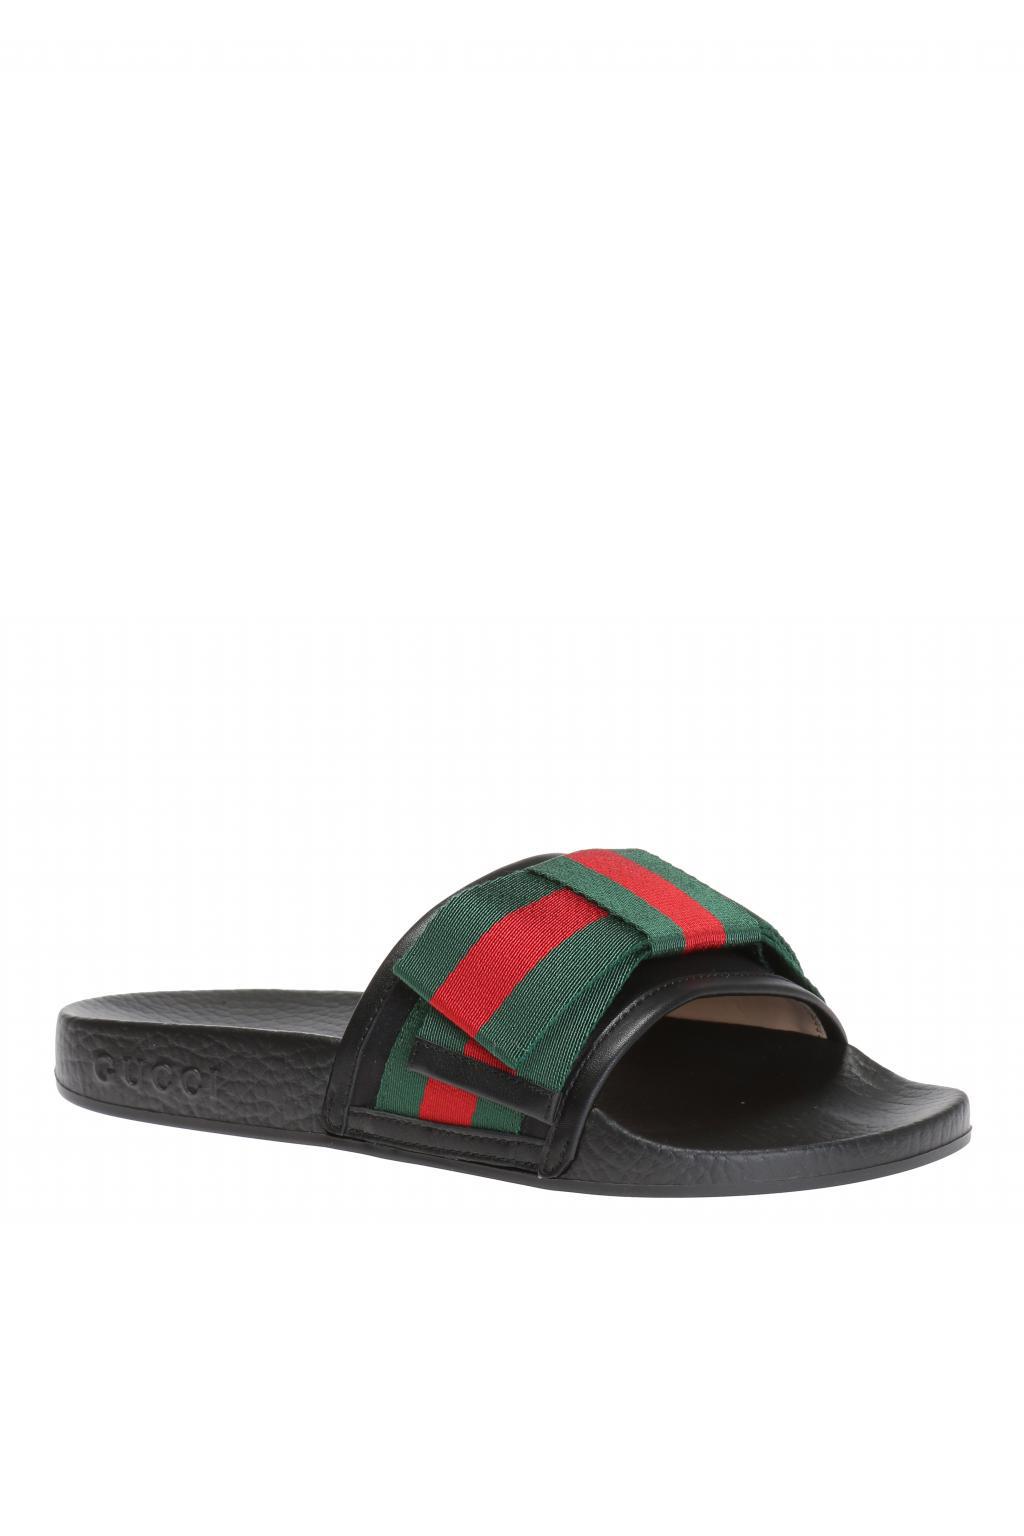 Gucci Leather Sliders With Bow - Lyst